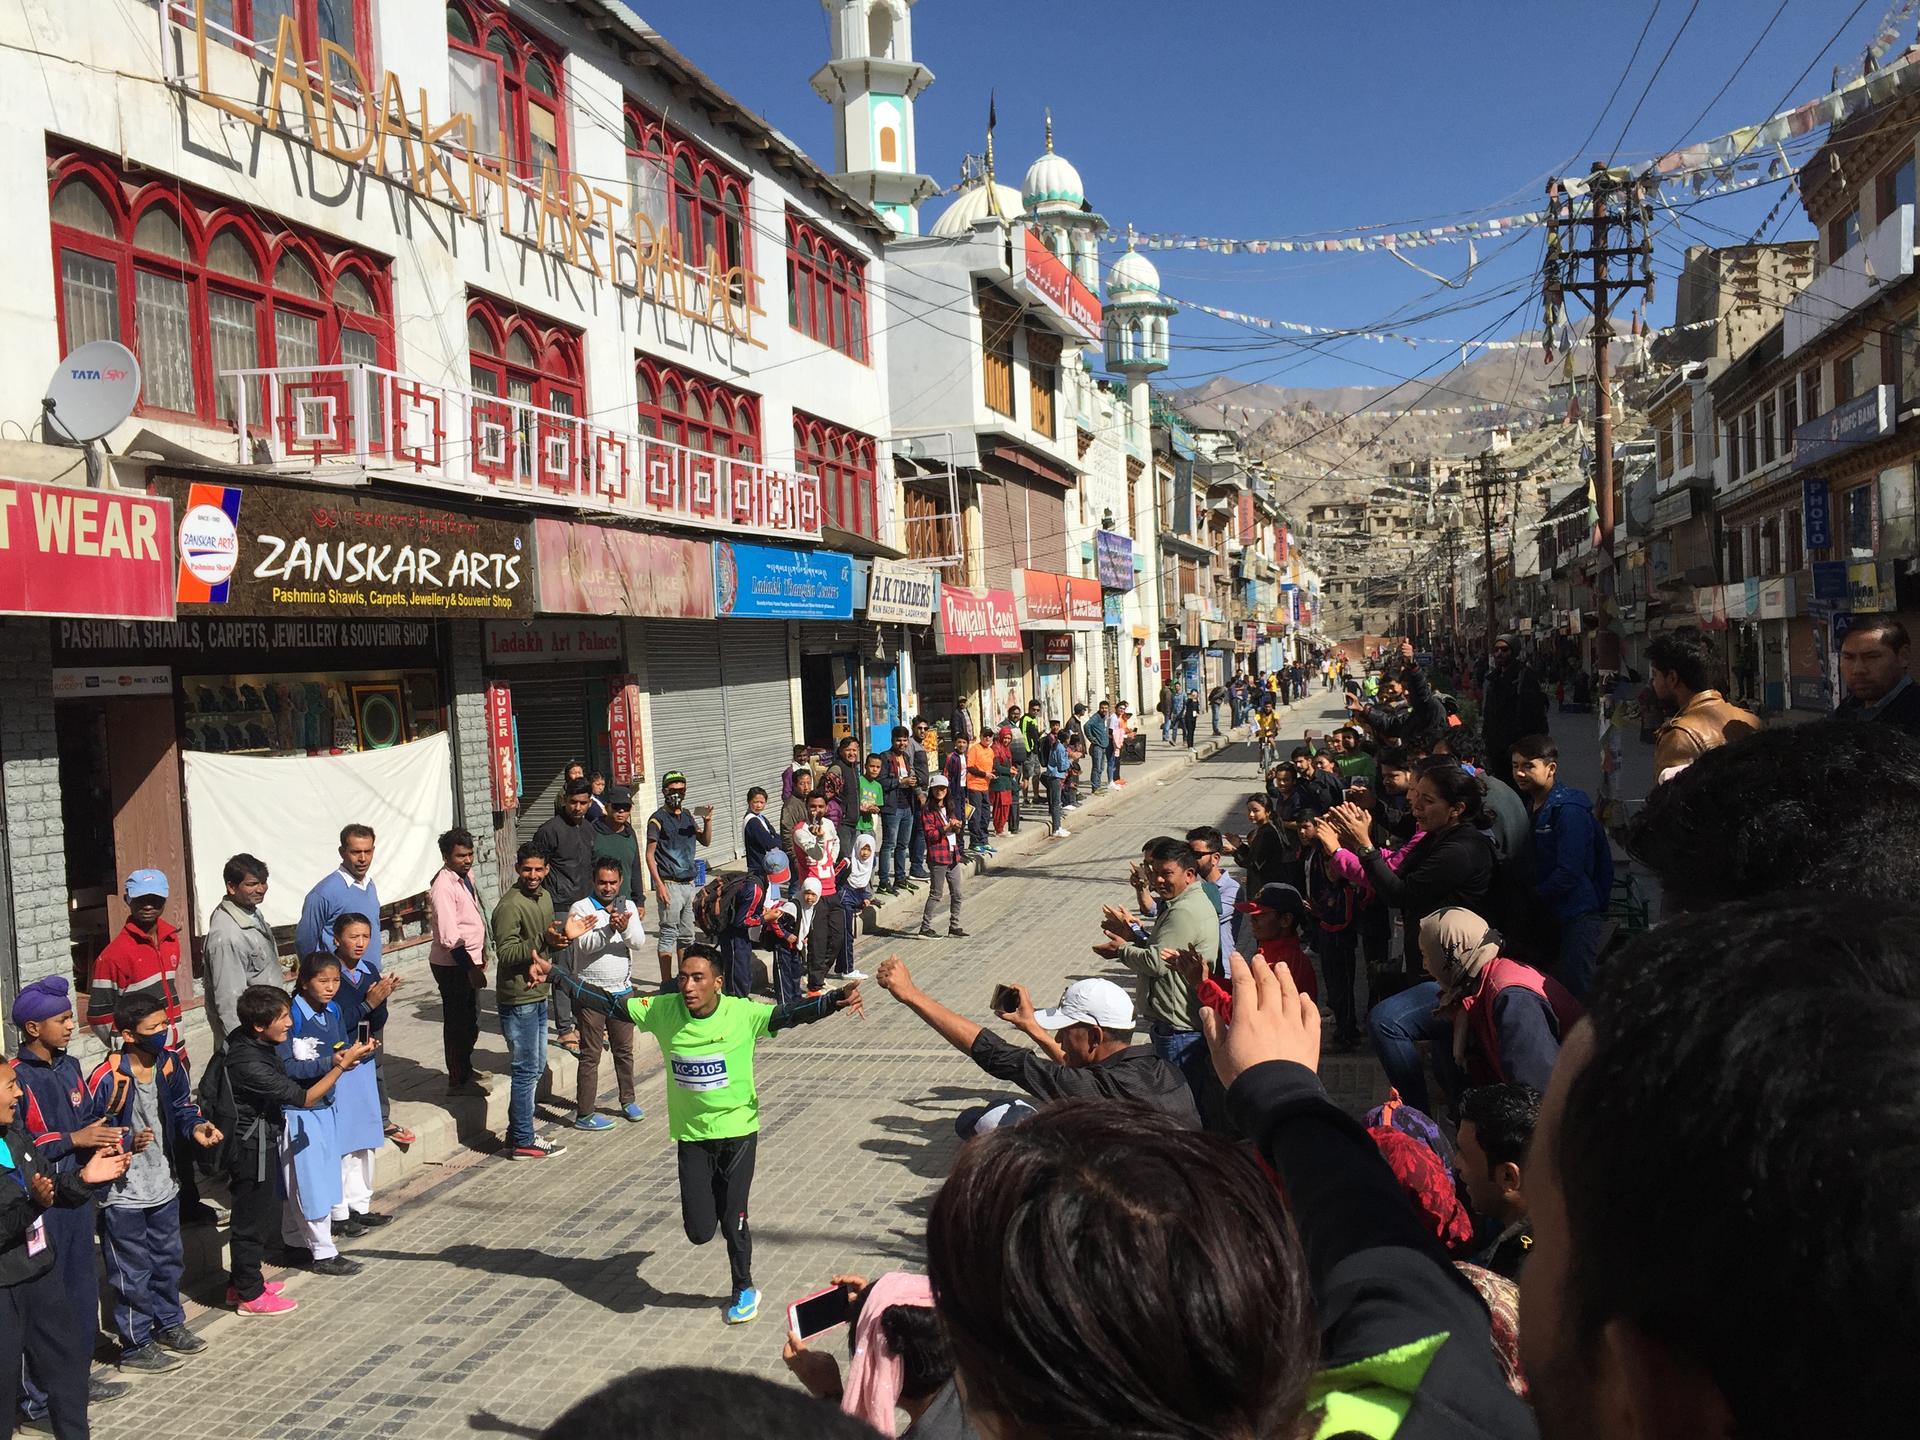 Shabbir Hussain reaches the finish line of the Khardung La Ultra Marathon, coming in first with a time of 6 hours and 23 minutes.